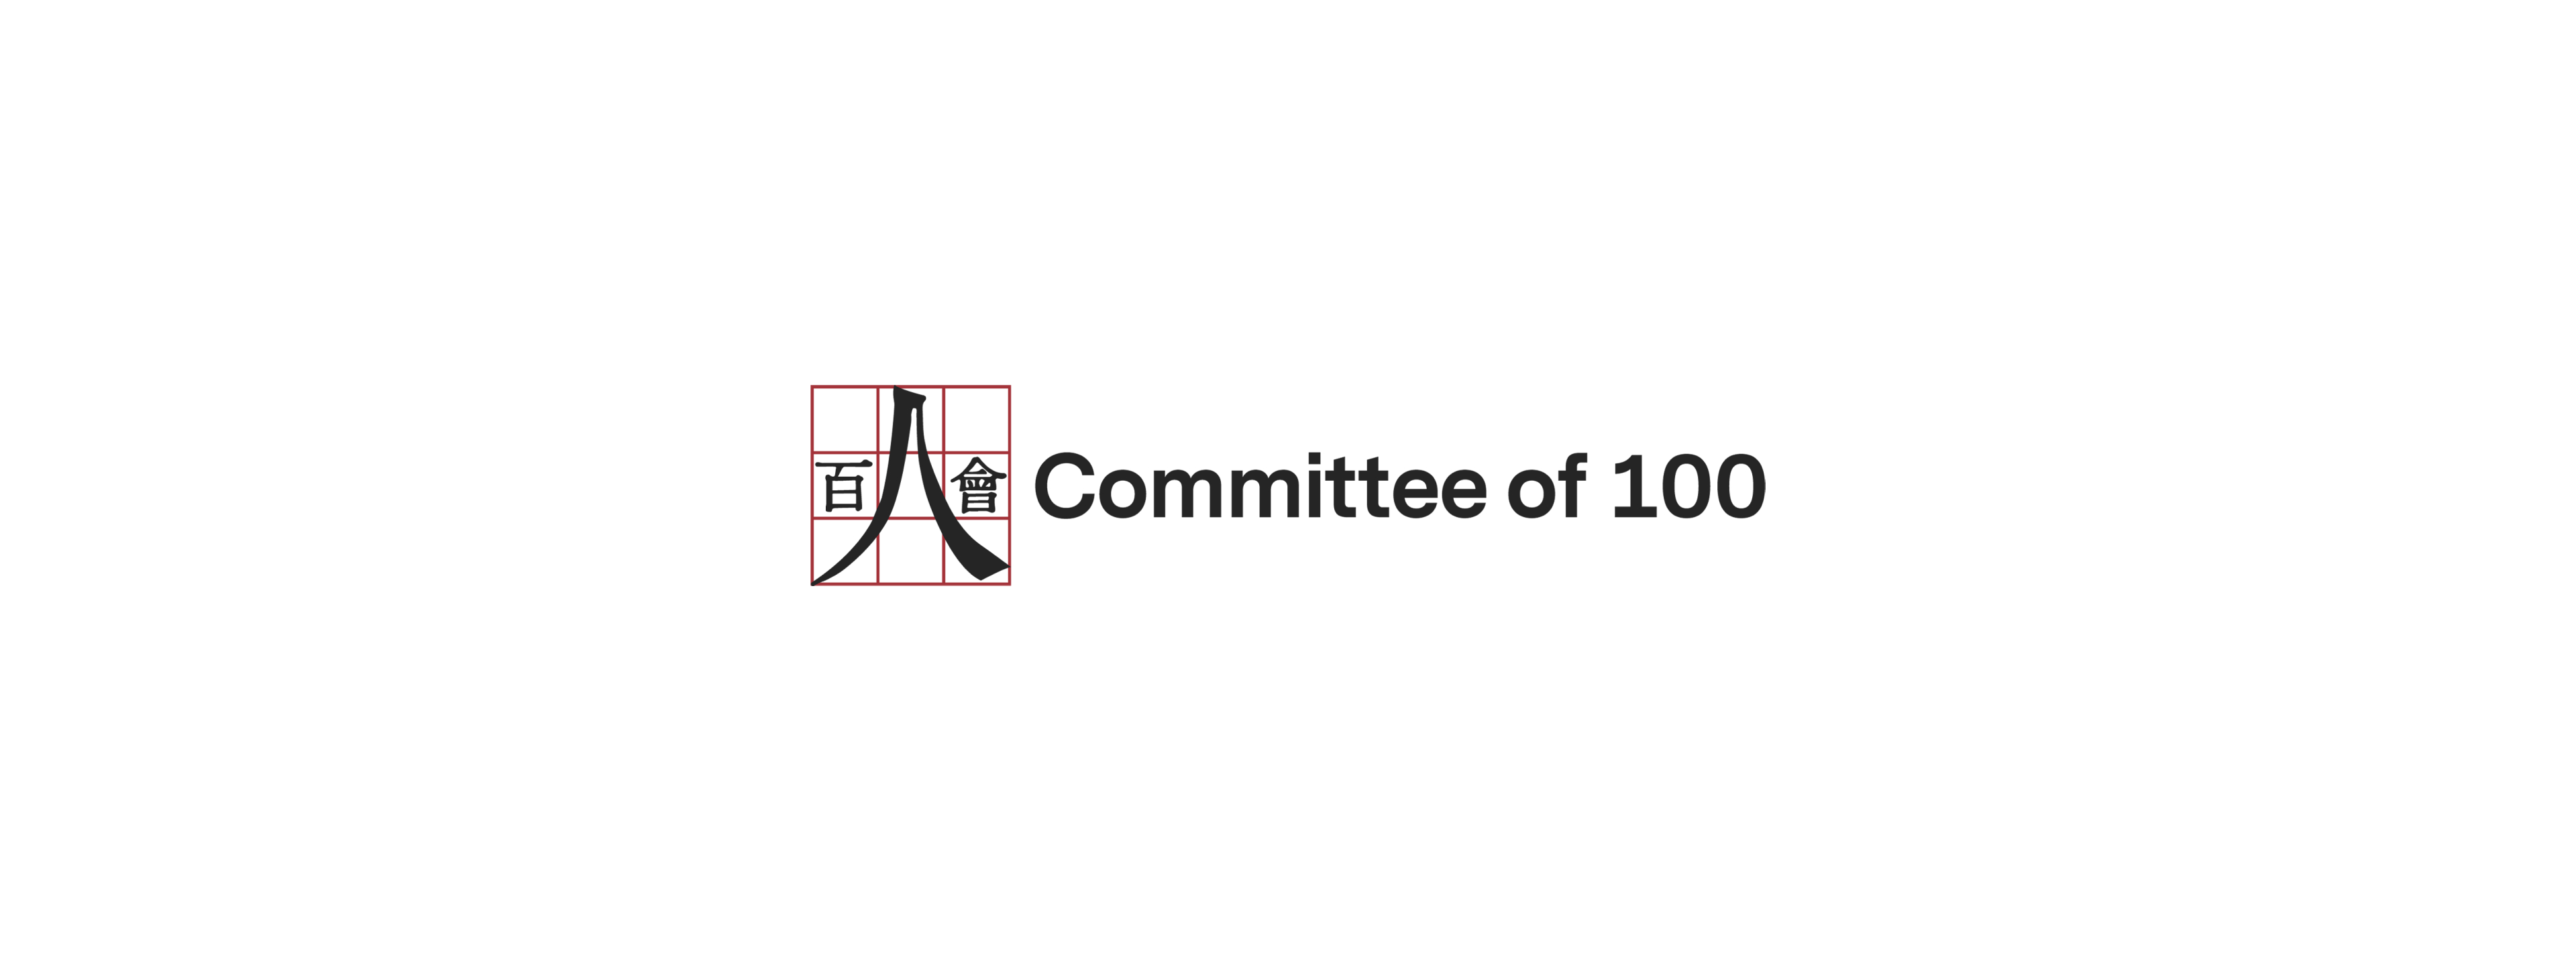 Committee of 100 Urges Community Support for Sherry Chen in Employment Discrimination Case